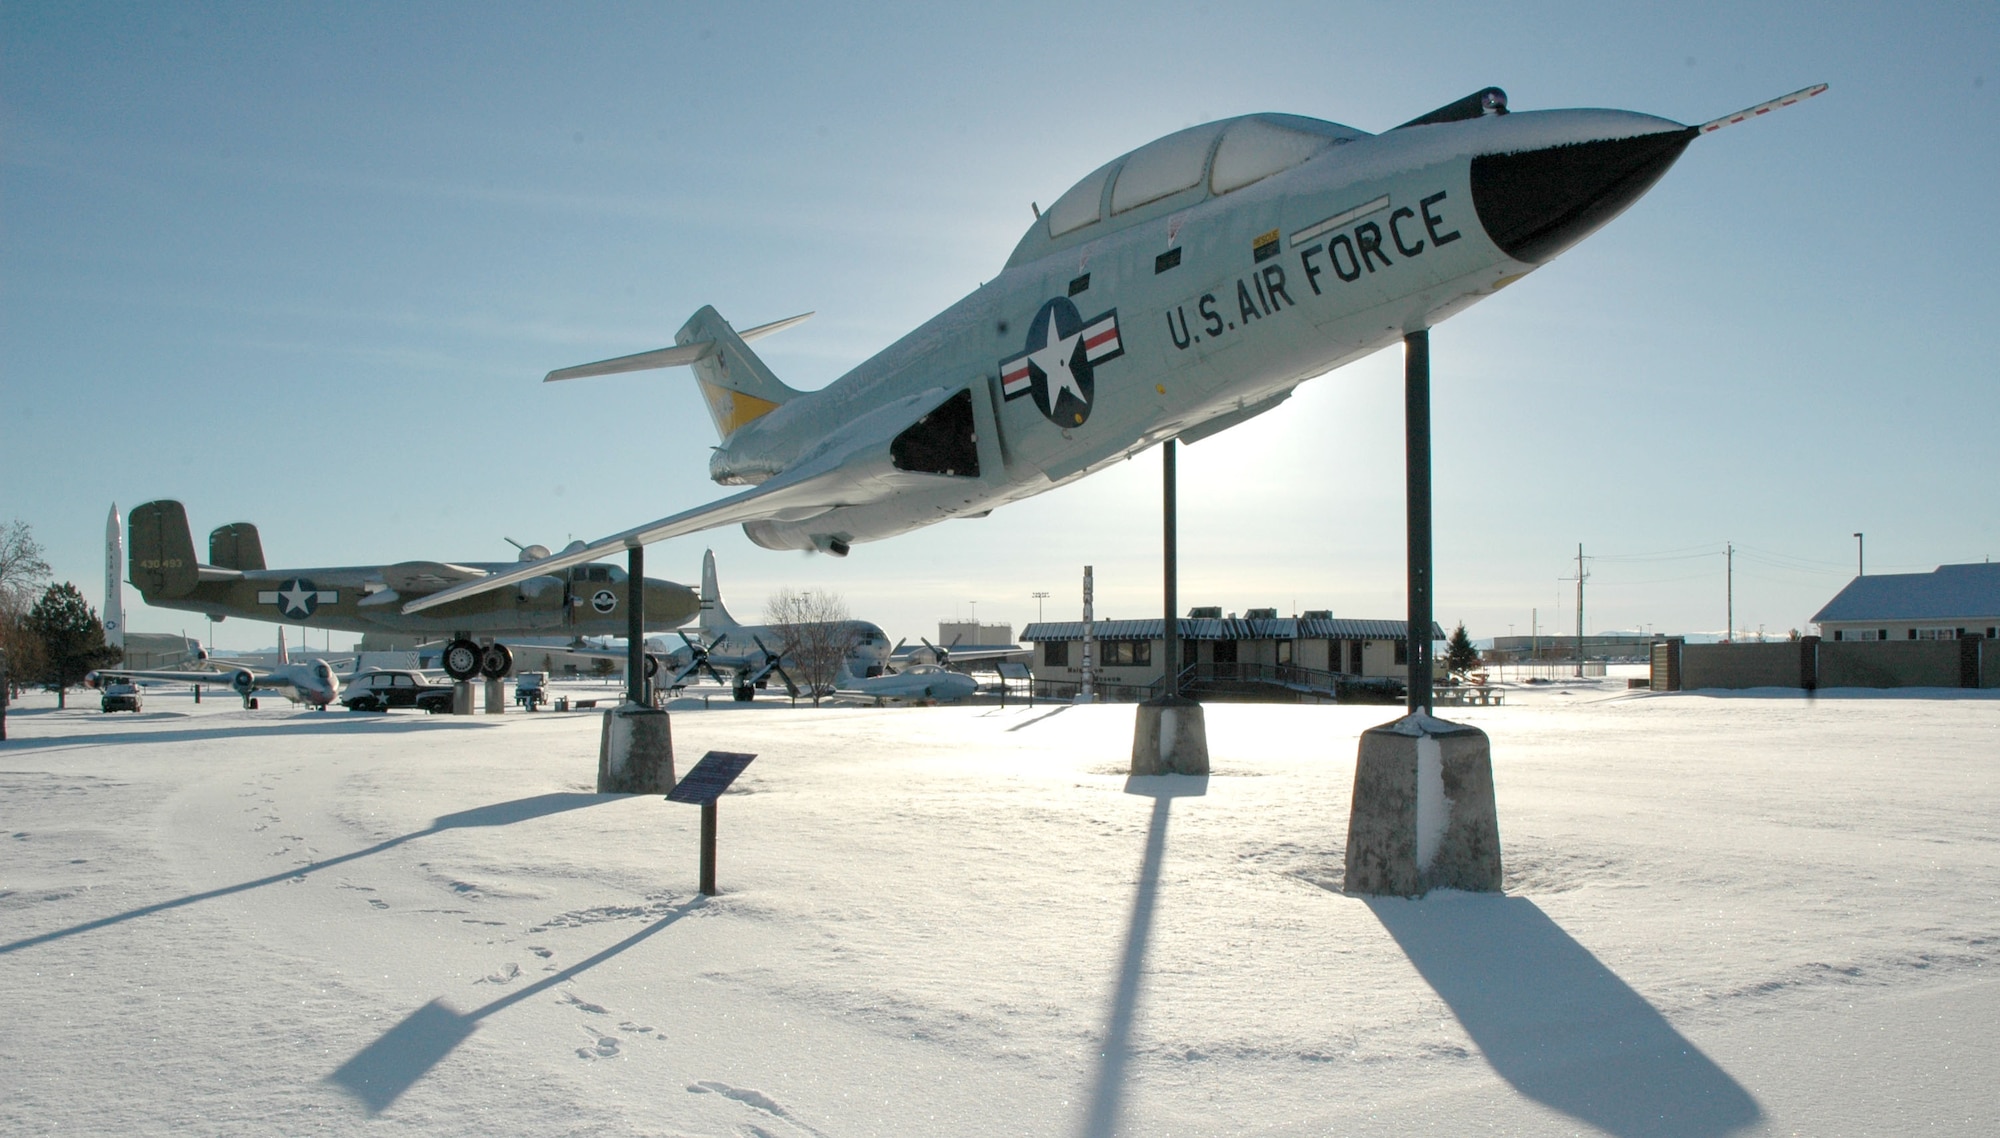 An F-101B “Voodoo,” is on display at the Malmstrom Museum air park. The air park showcases more than 10 preserved aircraft, vehicles and weapons systems near the 2nd Avenue N. gate. The museum is open Monday to Friday from 10 a.m. to 4 p.m. (U.S. Air Force photo/Airman 1st Class Dillon White)